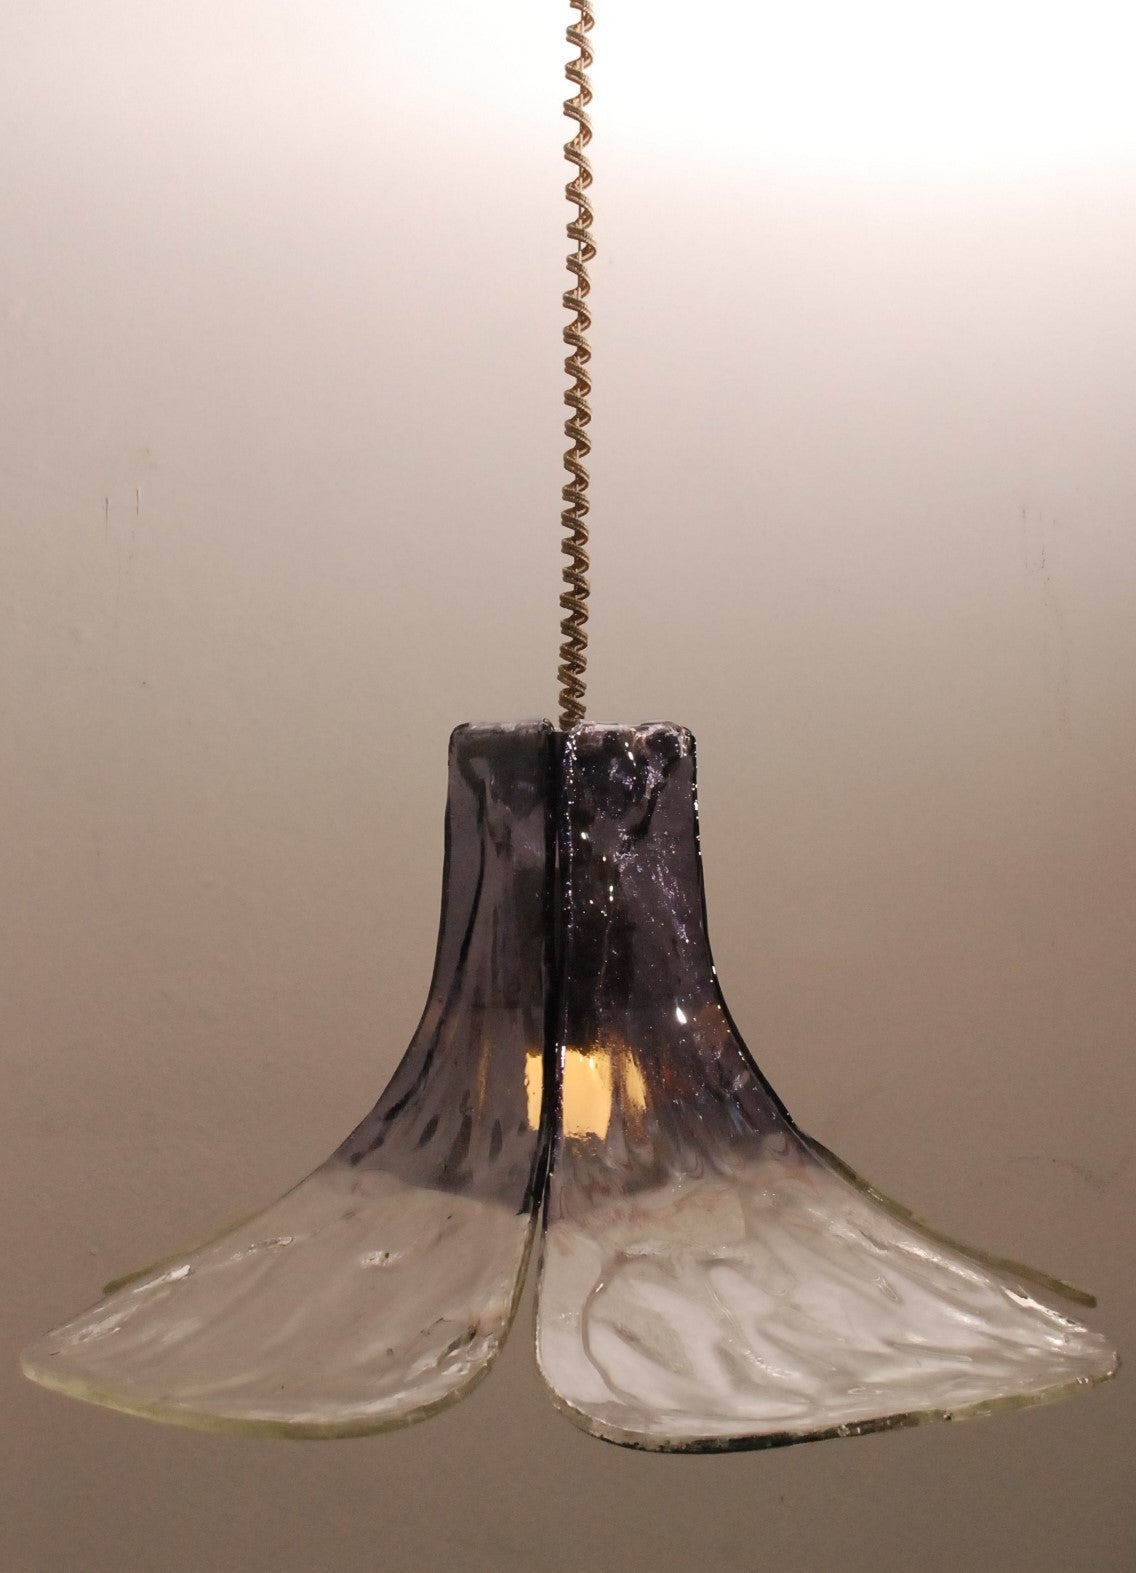 Heavy pending lamp from Mazzega with four impeccable leaves of murano glass. The height is adjustable. The lamp is in superb condition with the original wiring. Color is smoked to purple.